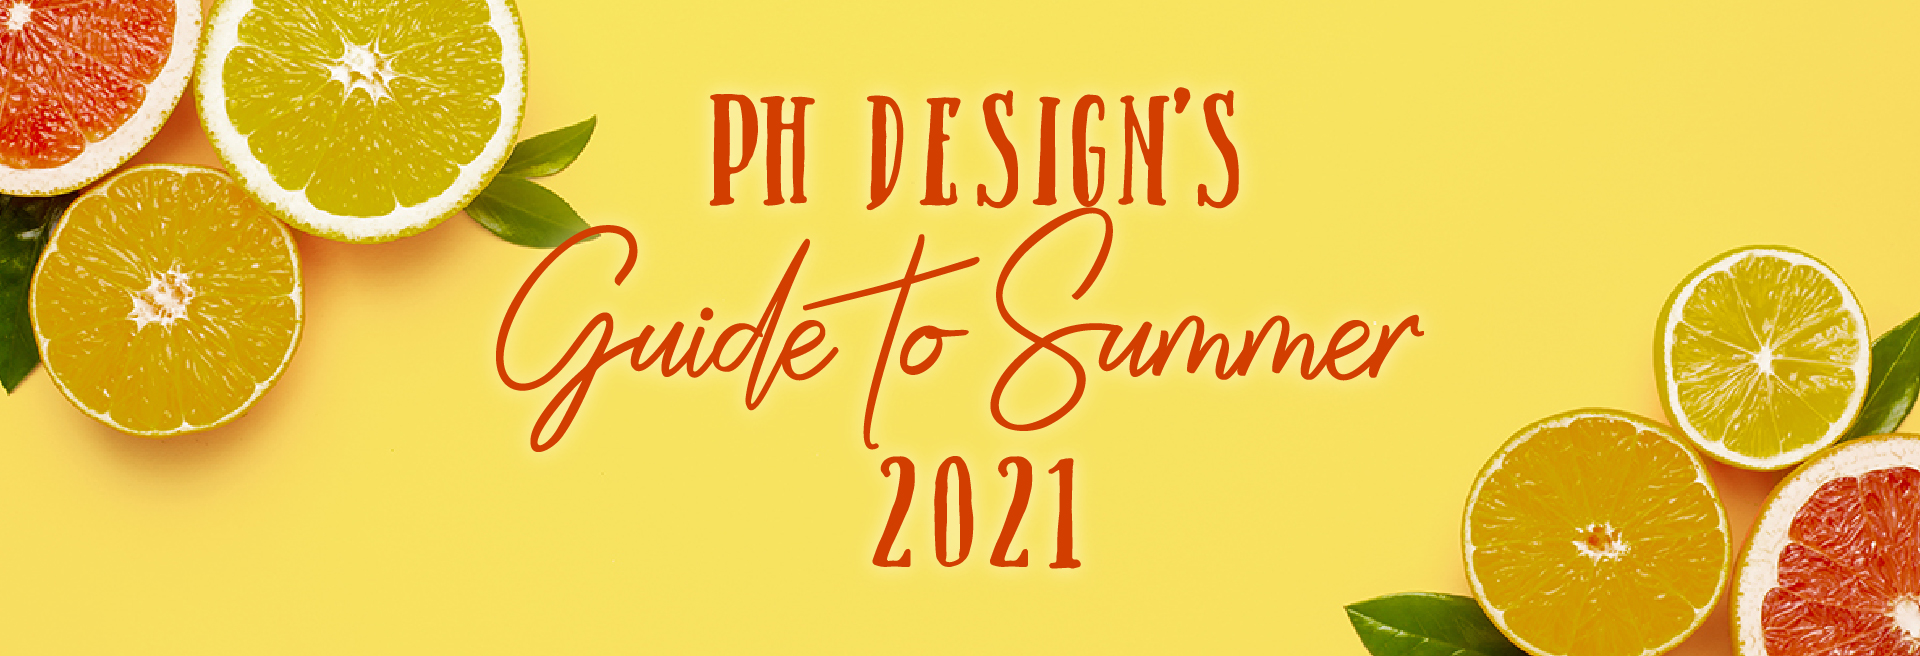 PH Design’s Guide to Summer 2021